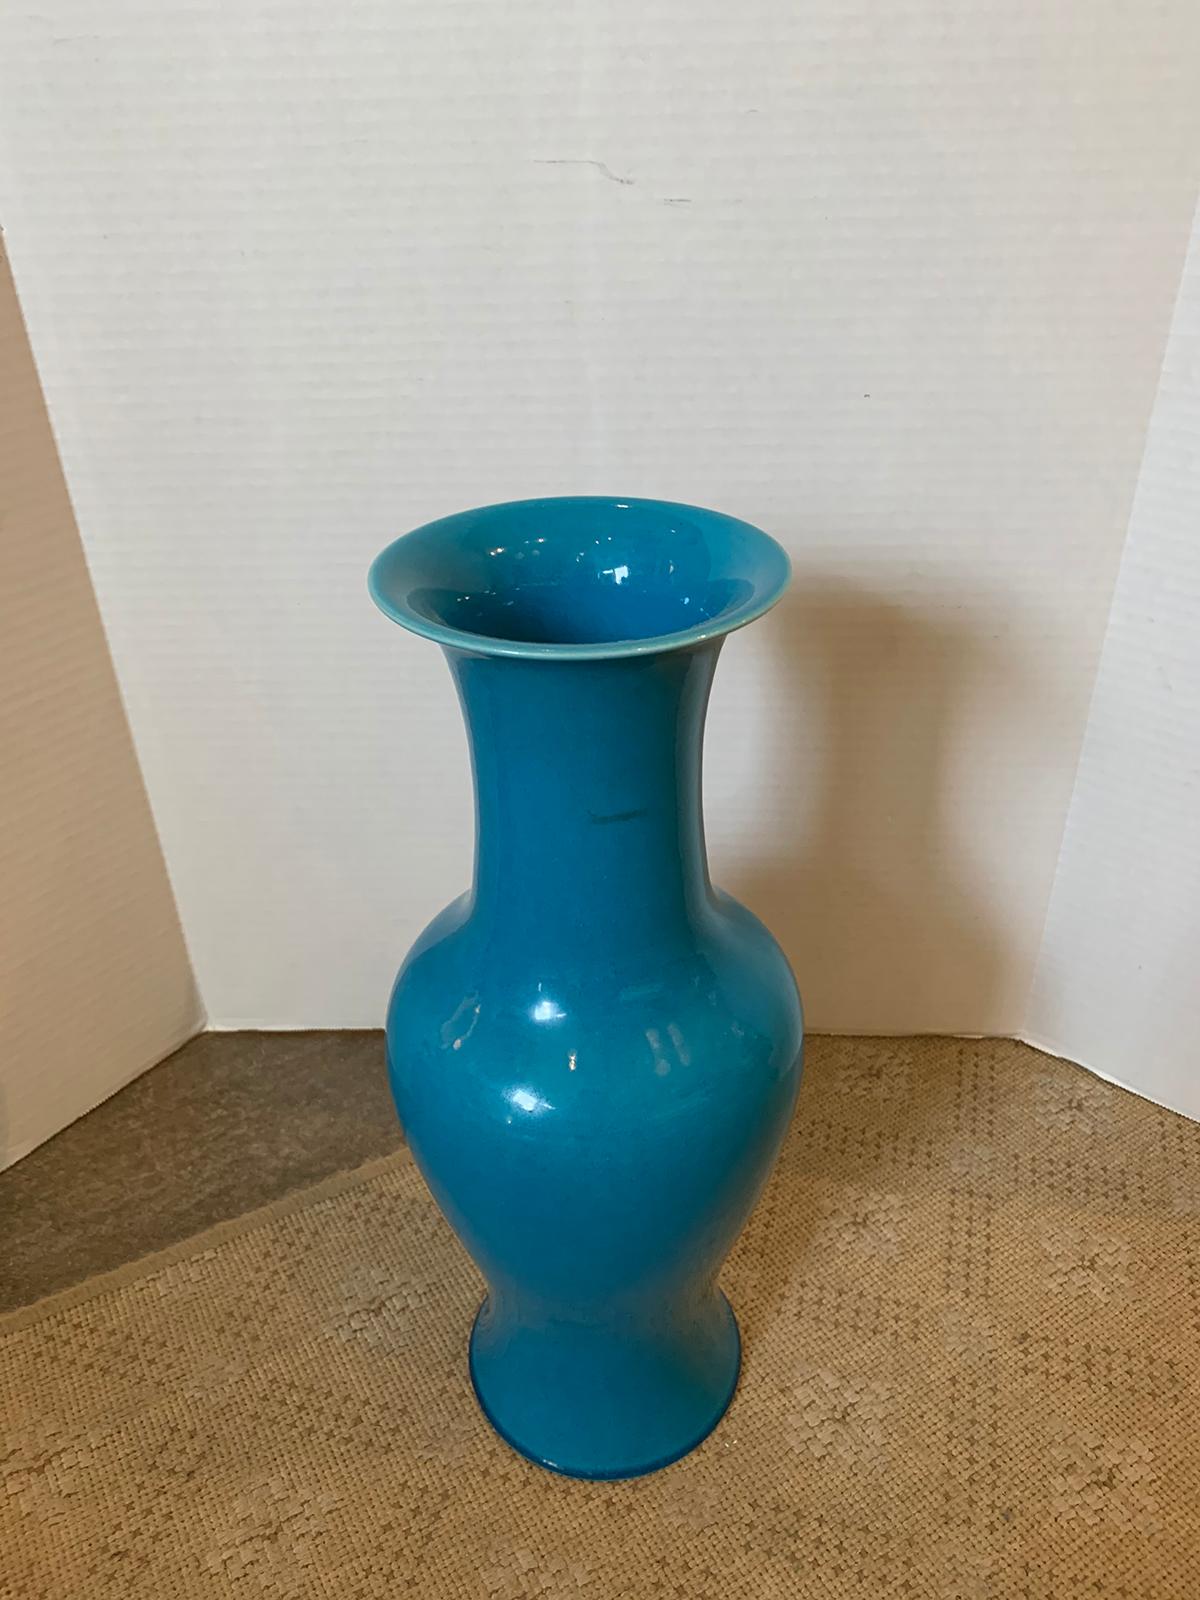 19th Century Late 19th-Early 20th Century Chinese Turquoise Blue Glazed Baluster Form Vase